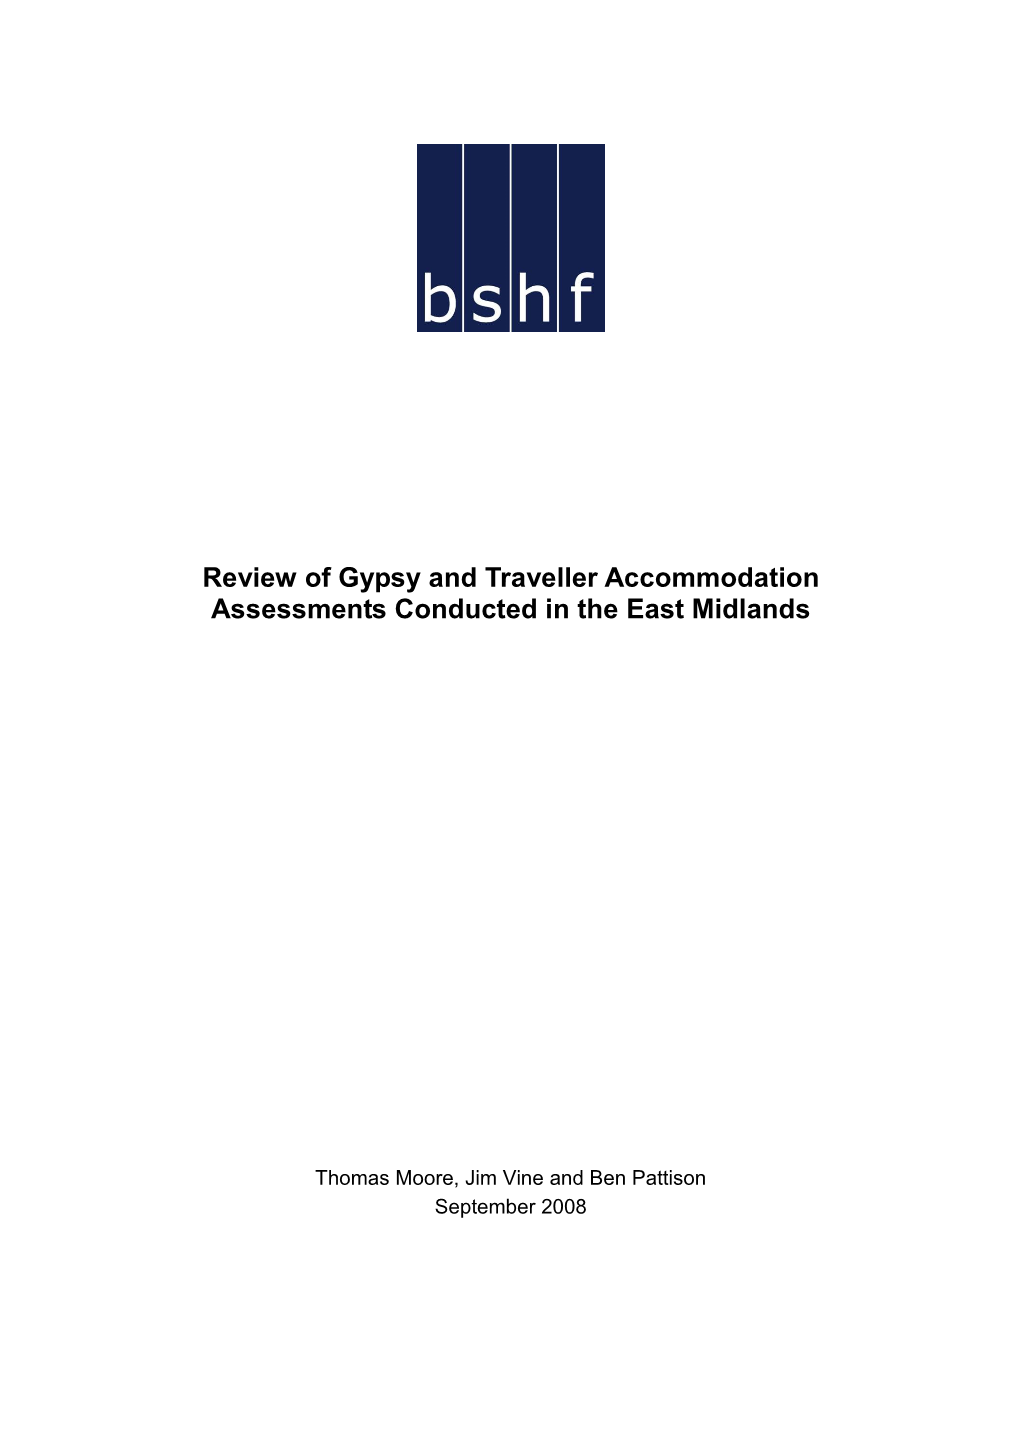 Review of Gypsy and Traveller Accommodation Assessments Conducted in the East Midlands